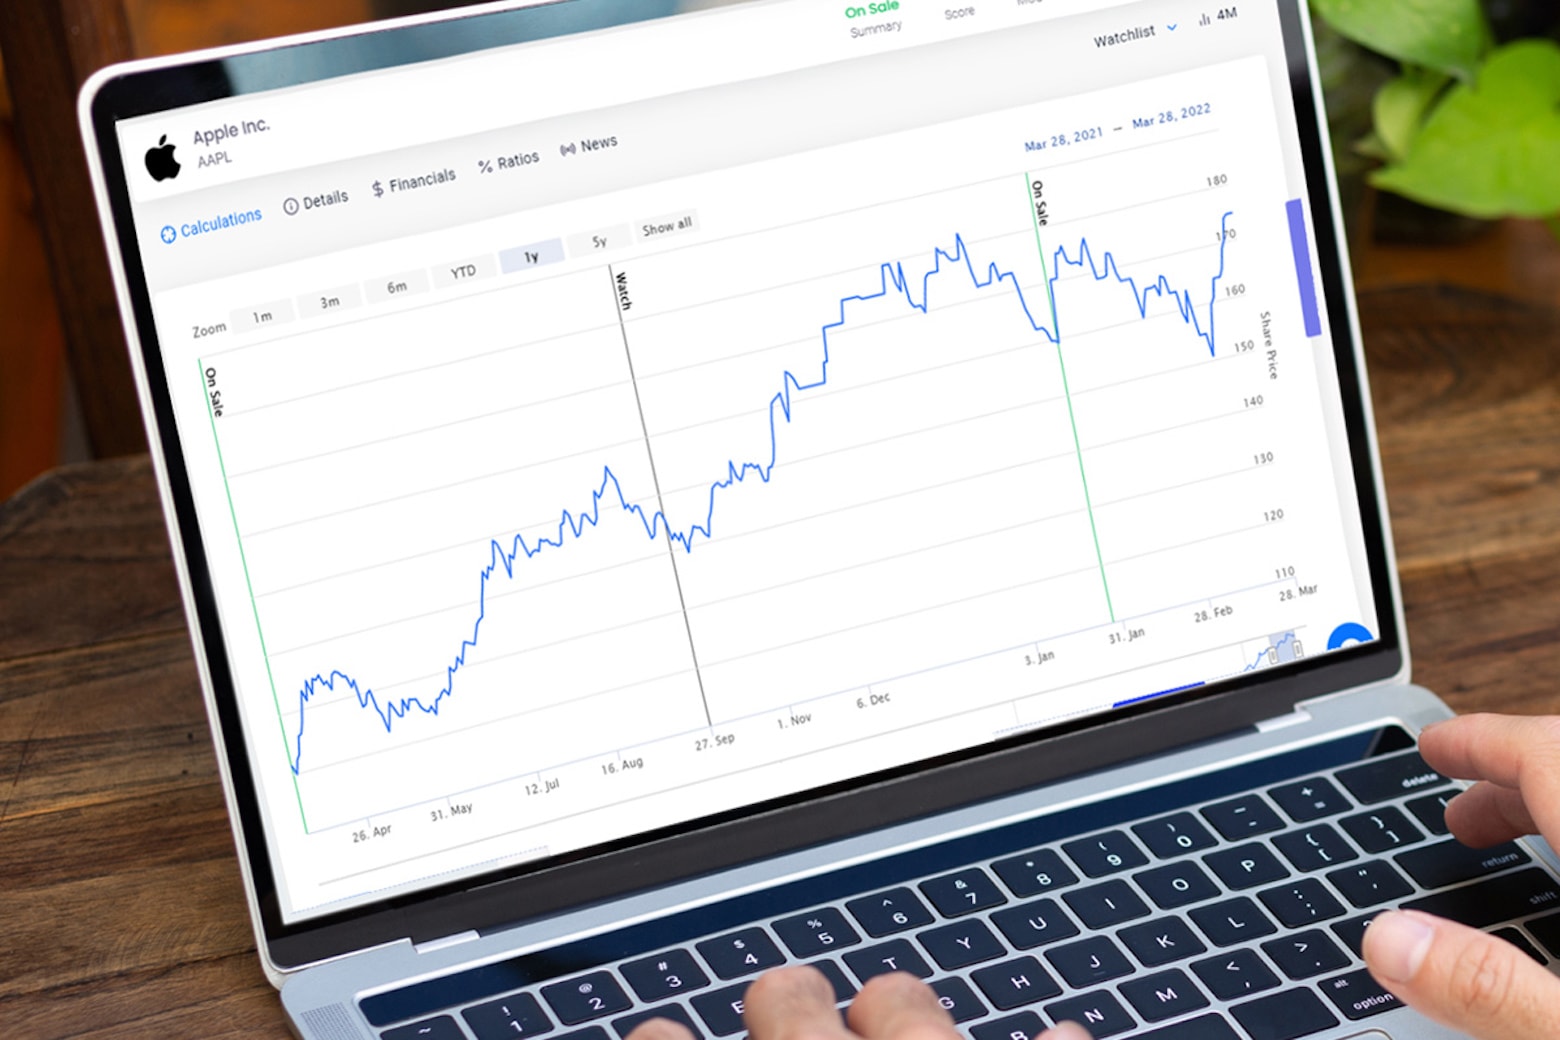 Score smart stock analyzer for just $200 and learn to make solid investments